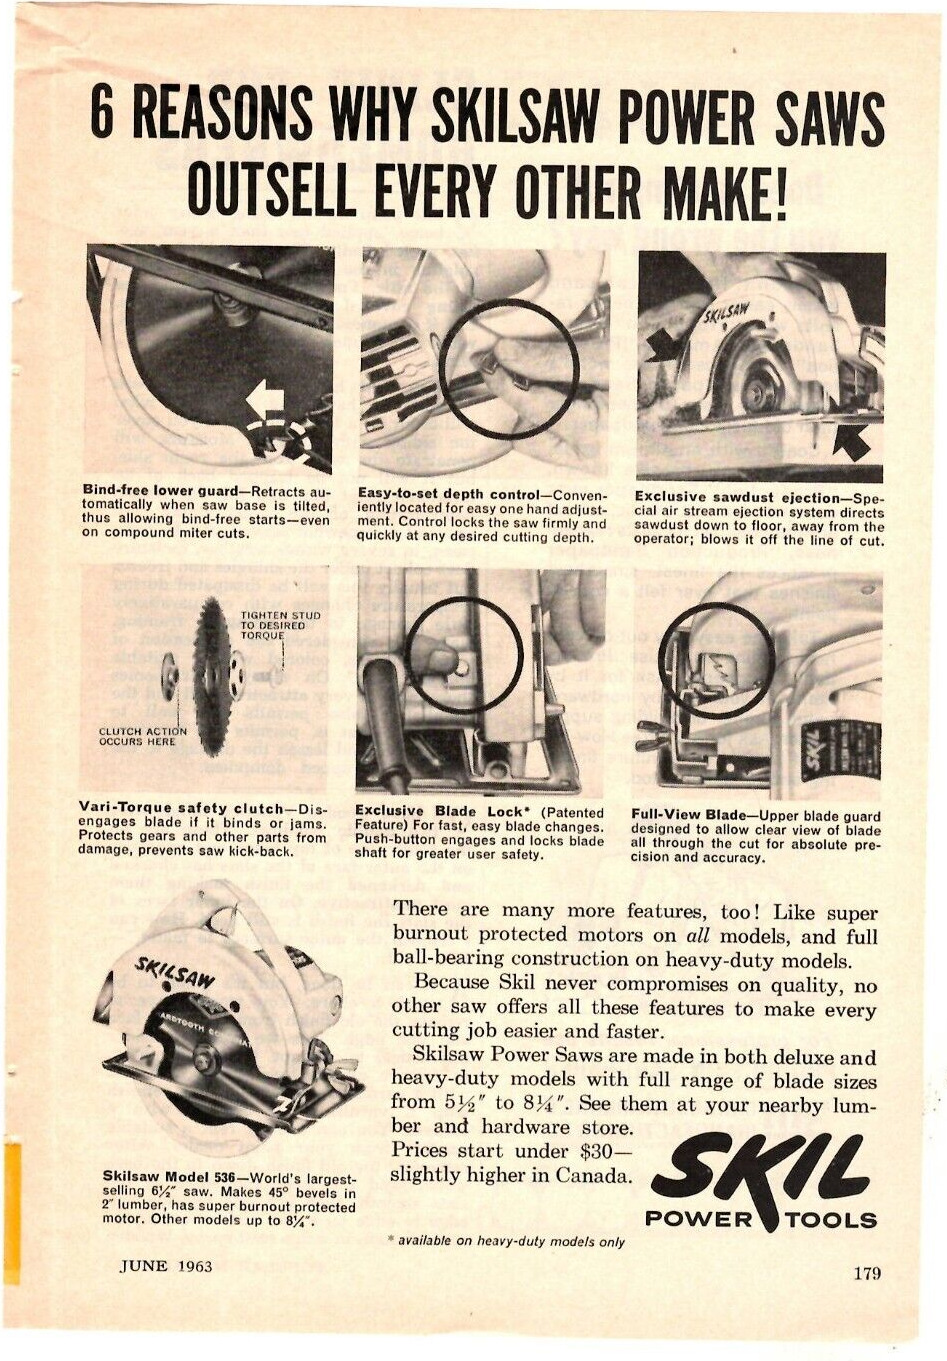 1963 Print Ad Skil Power Tools 6 Reasons why Skilsaw Power Saws Outsell Every